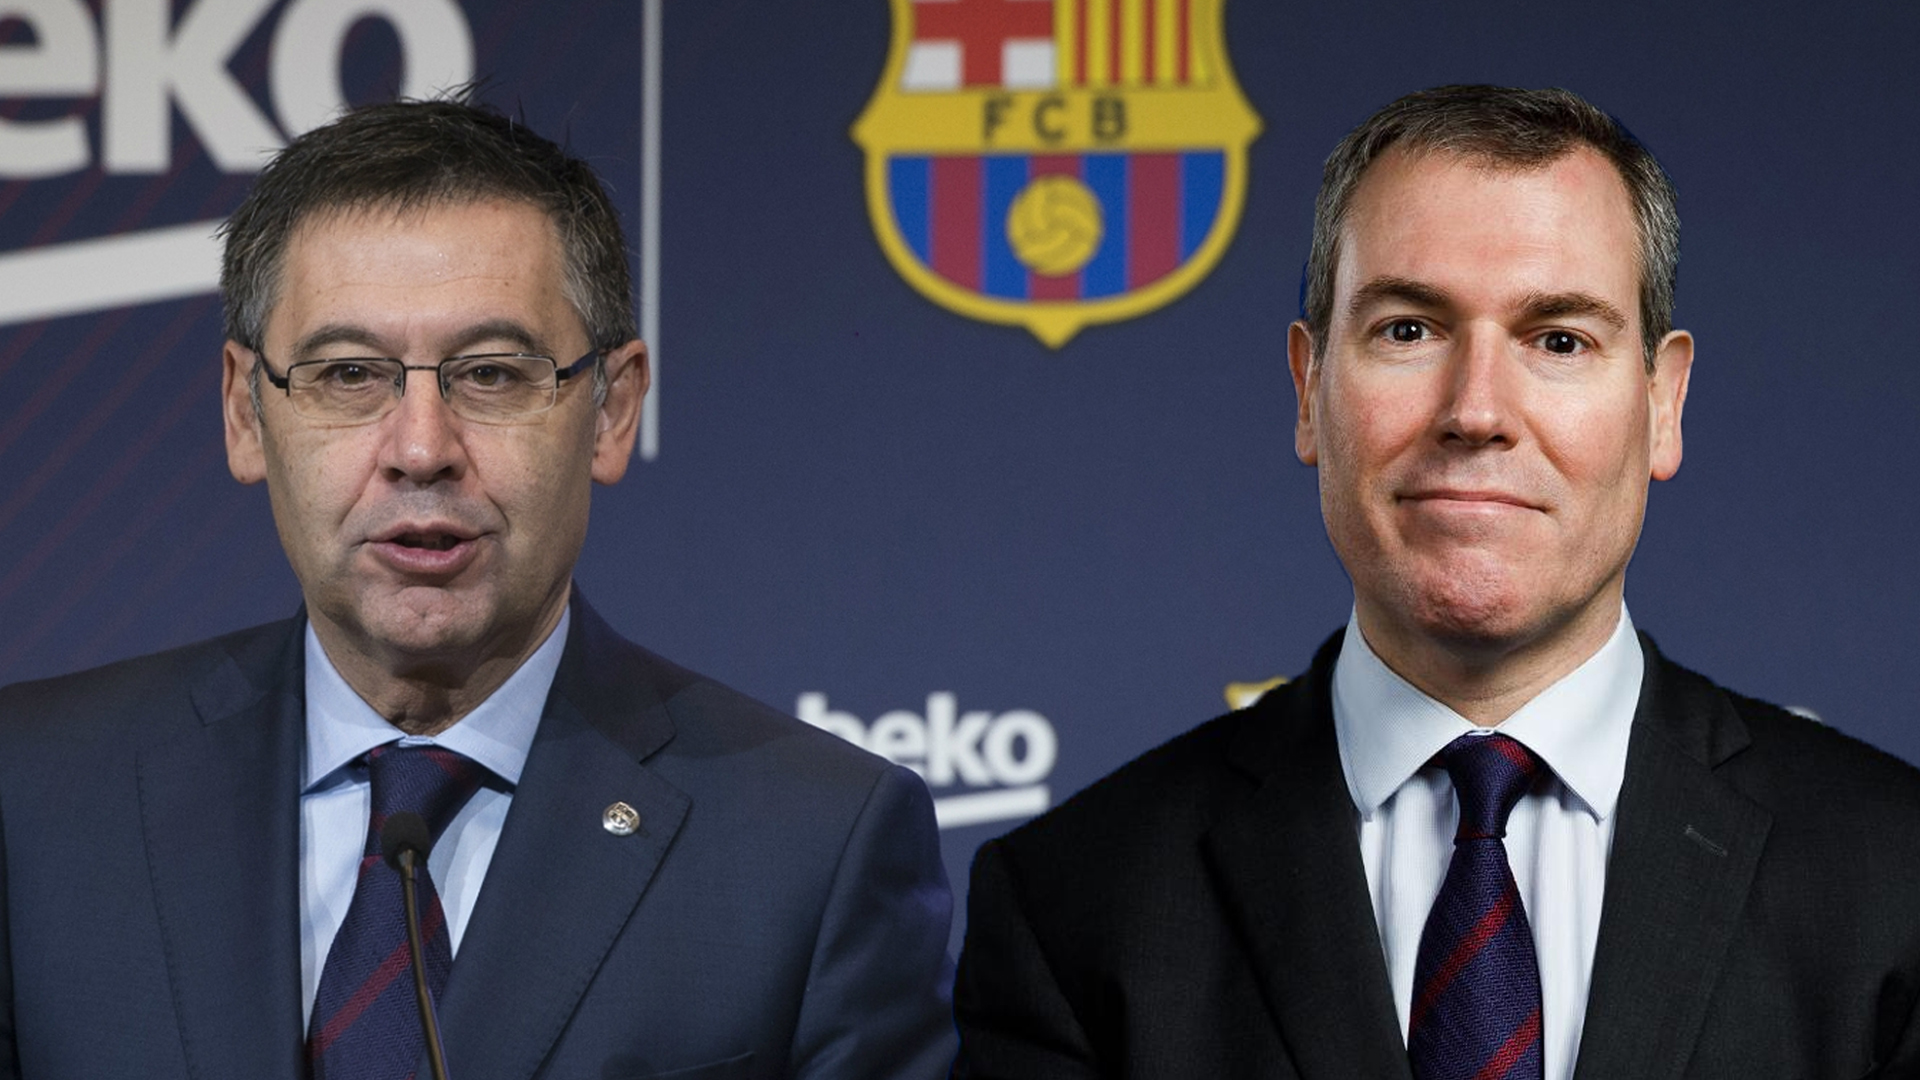 'Corruption is evident at Barca' – Rousaud ready to go to legal war with Bartomeu